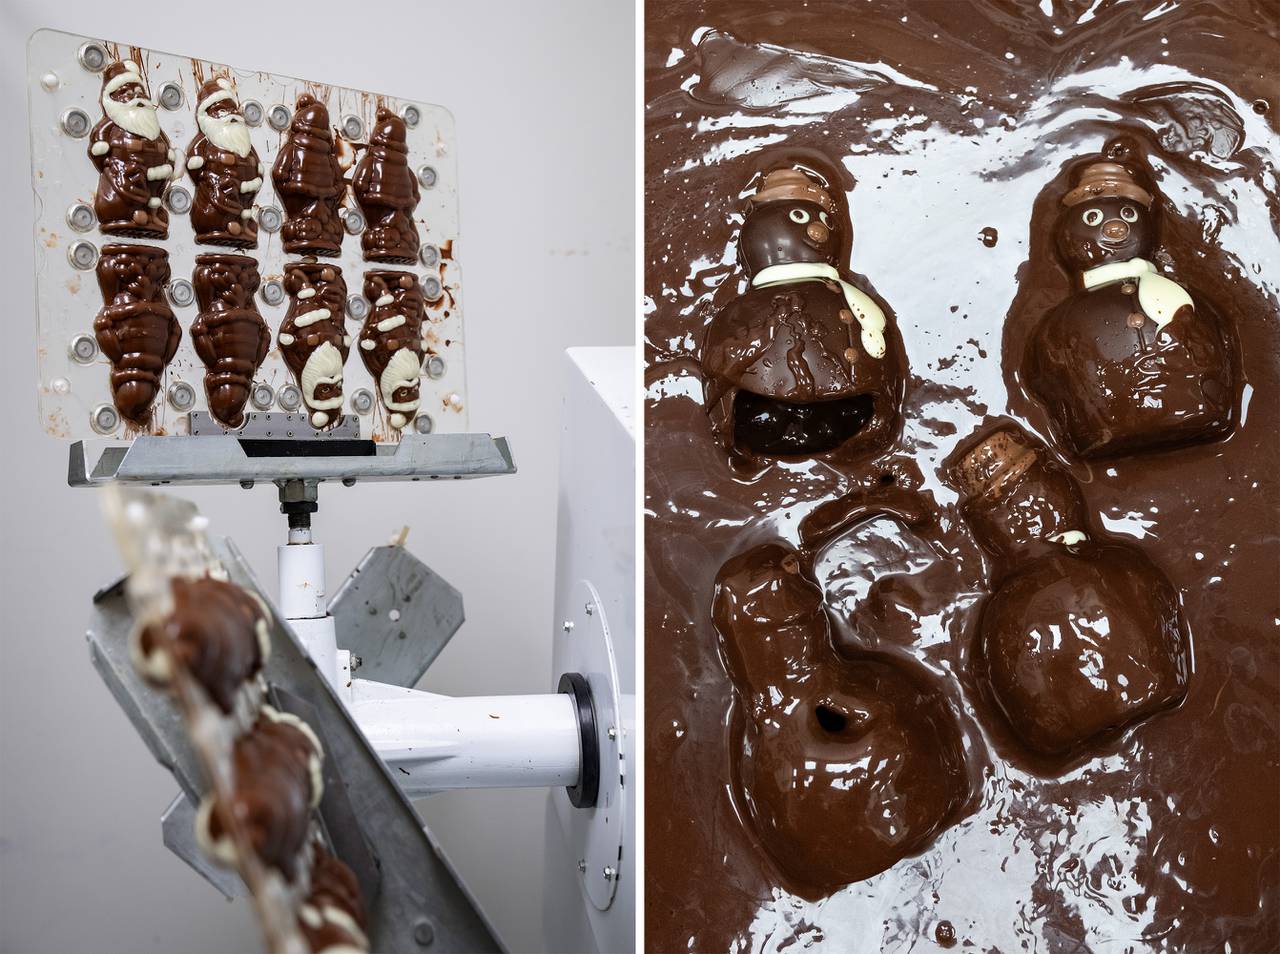 Left: Molds of Santas rotate on a machine that ensures the chocolate, which is hollow, is distributed evenly.
Right: Snowmen that cracked in their molds and weren’t fit to sell melt in a pan.